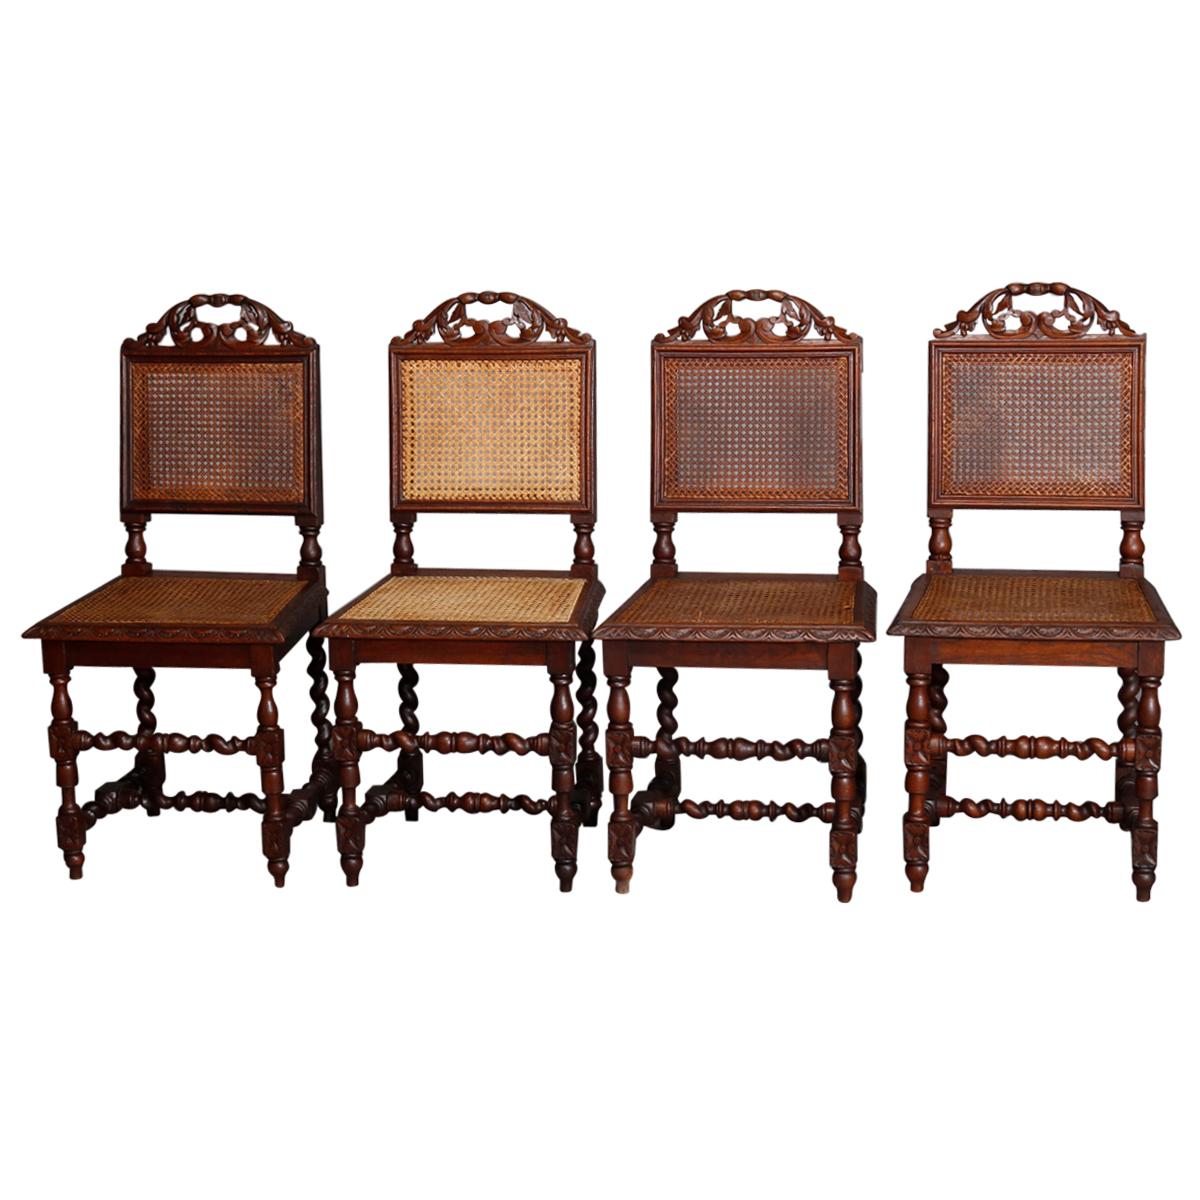 Antique Set of Four French Renaissance Carved Walnut & Cane Chairs, 19th Century